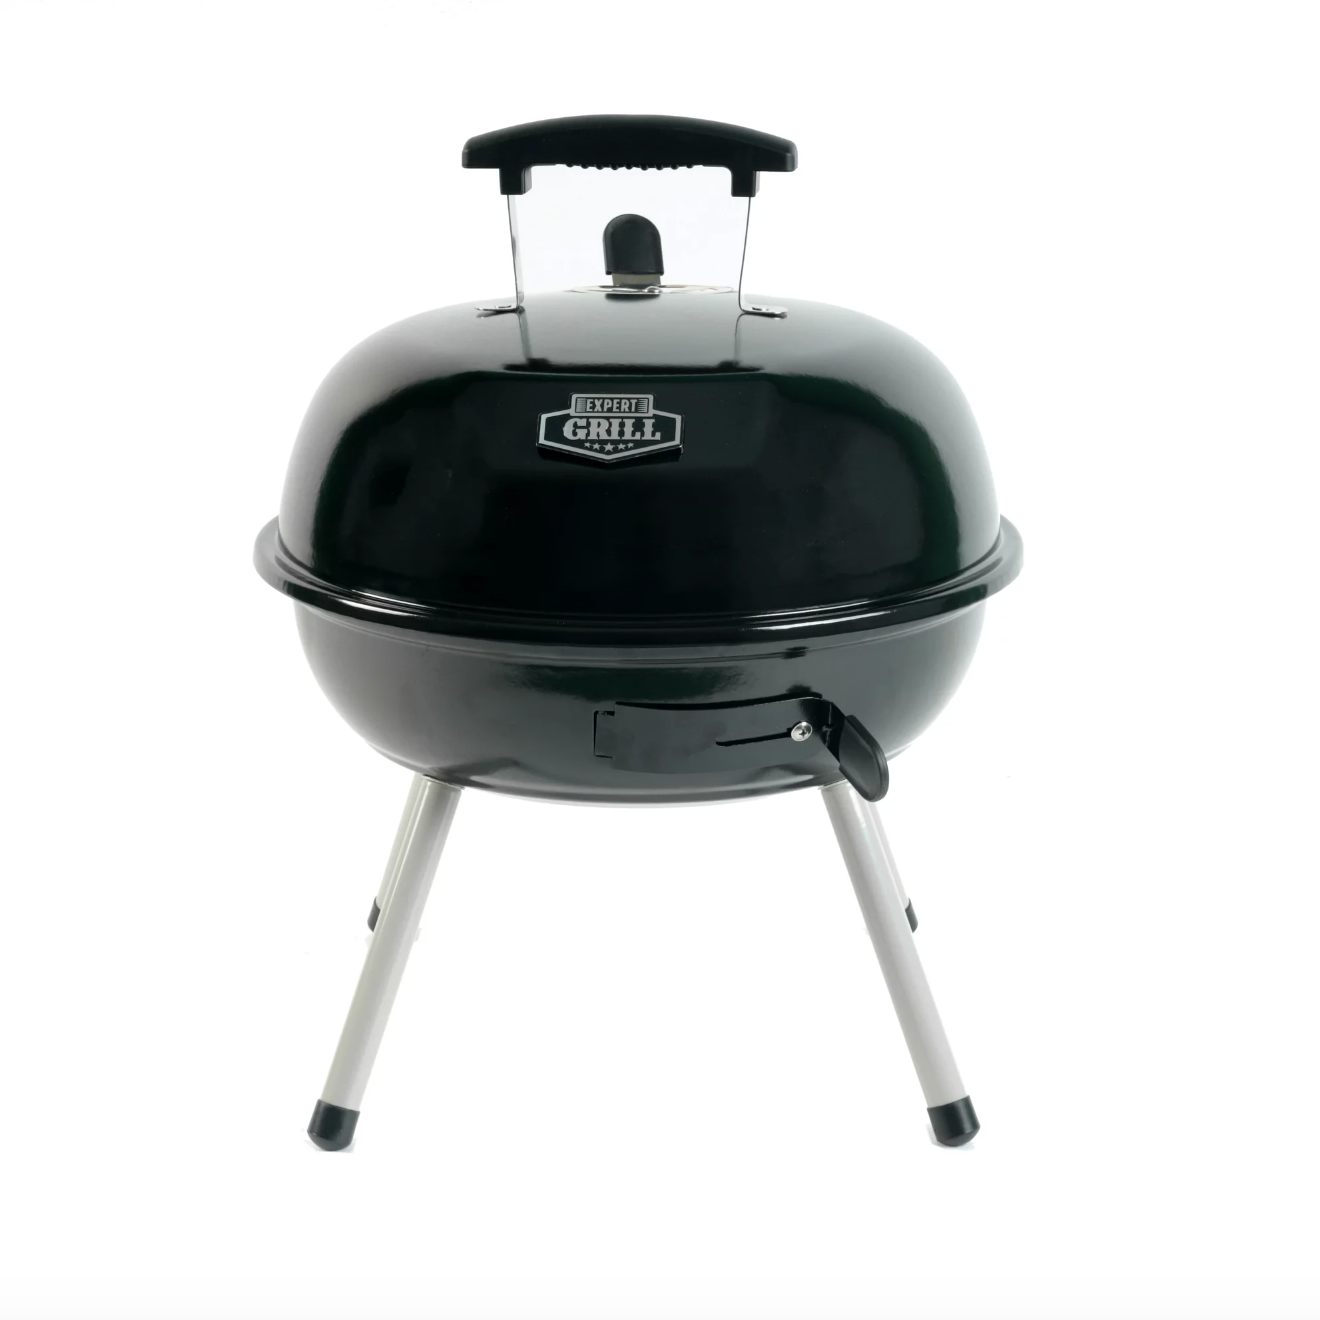 Small black charcoal grill